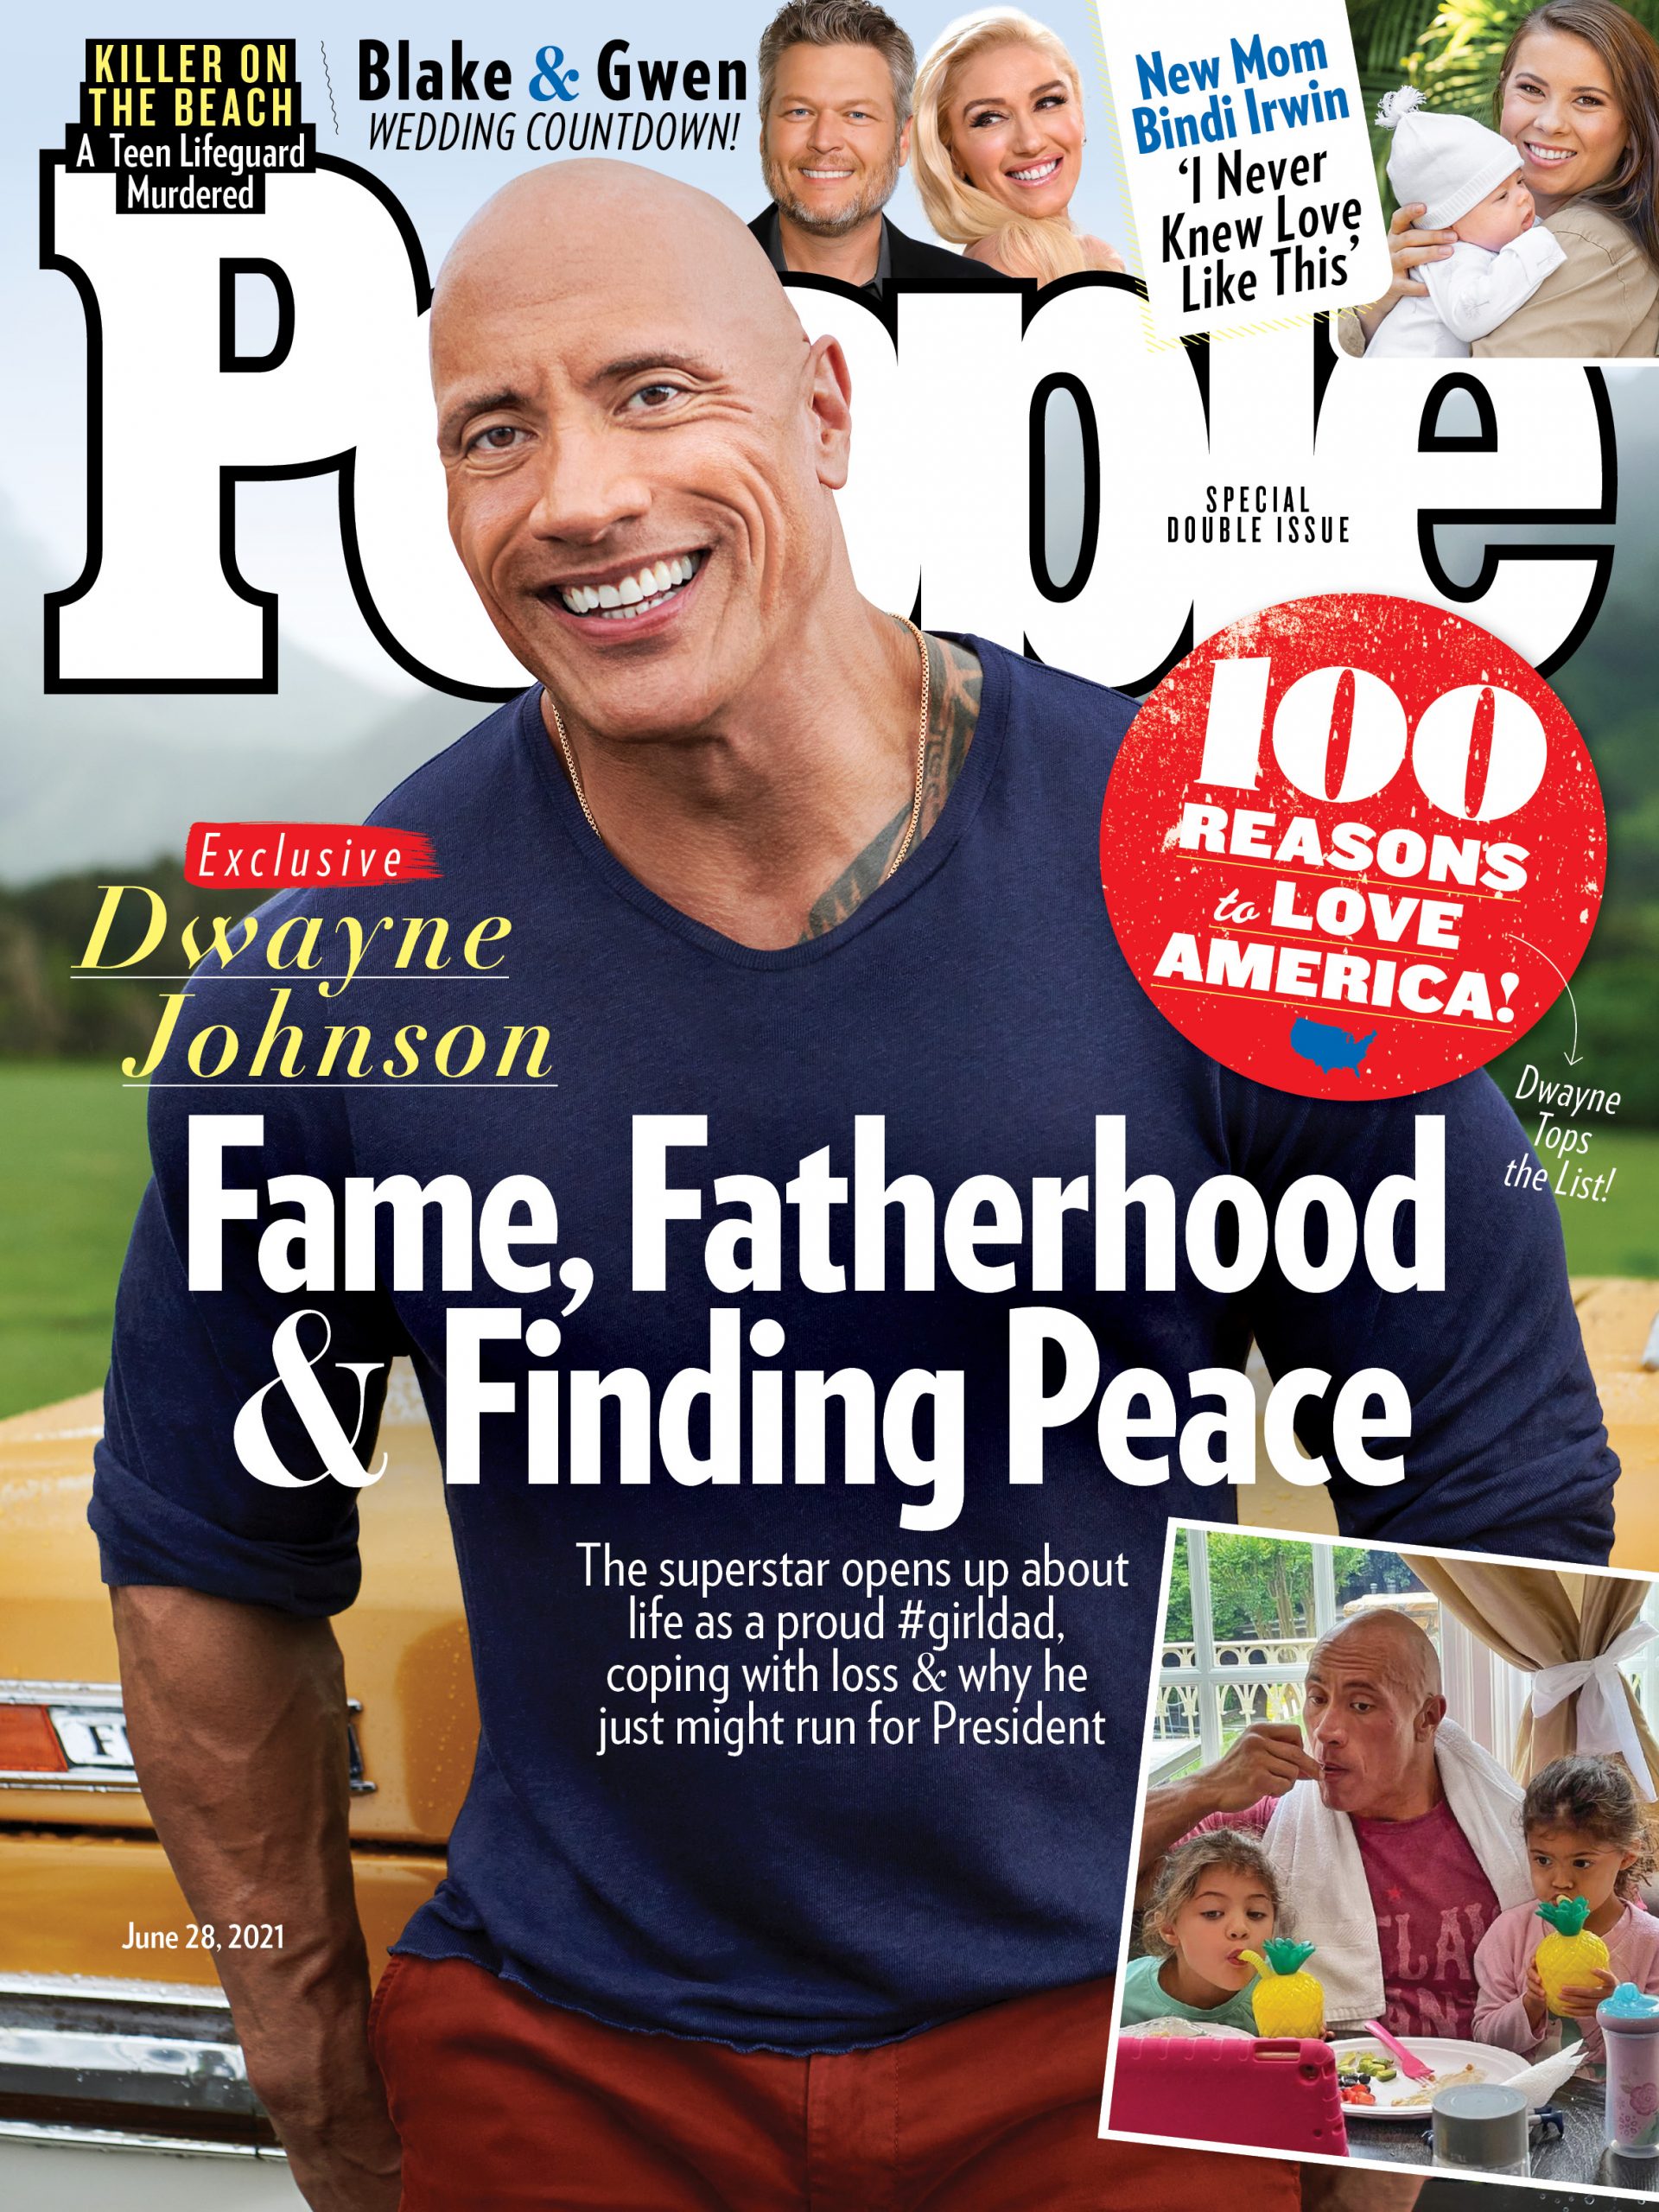 Dwayne Johnson Tops PEOPLE's List of 100 Reasons to Love America: 'I've Been a Lucky Guy'